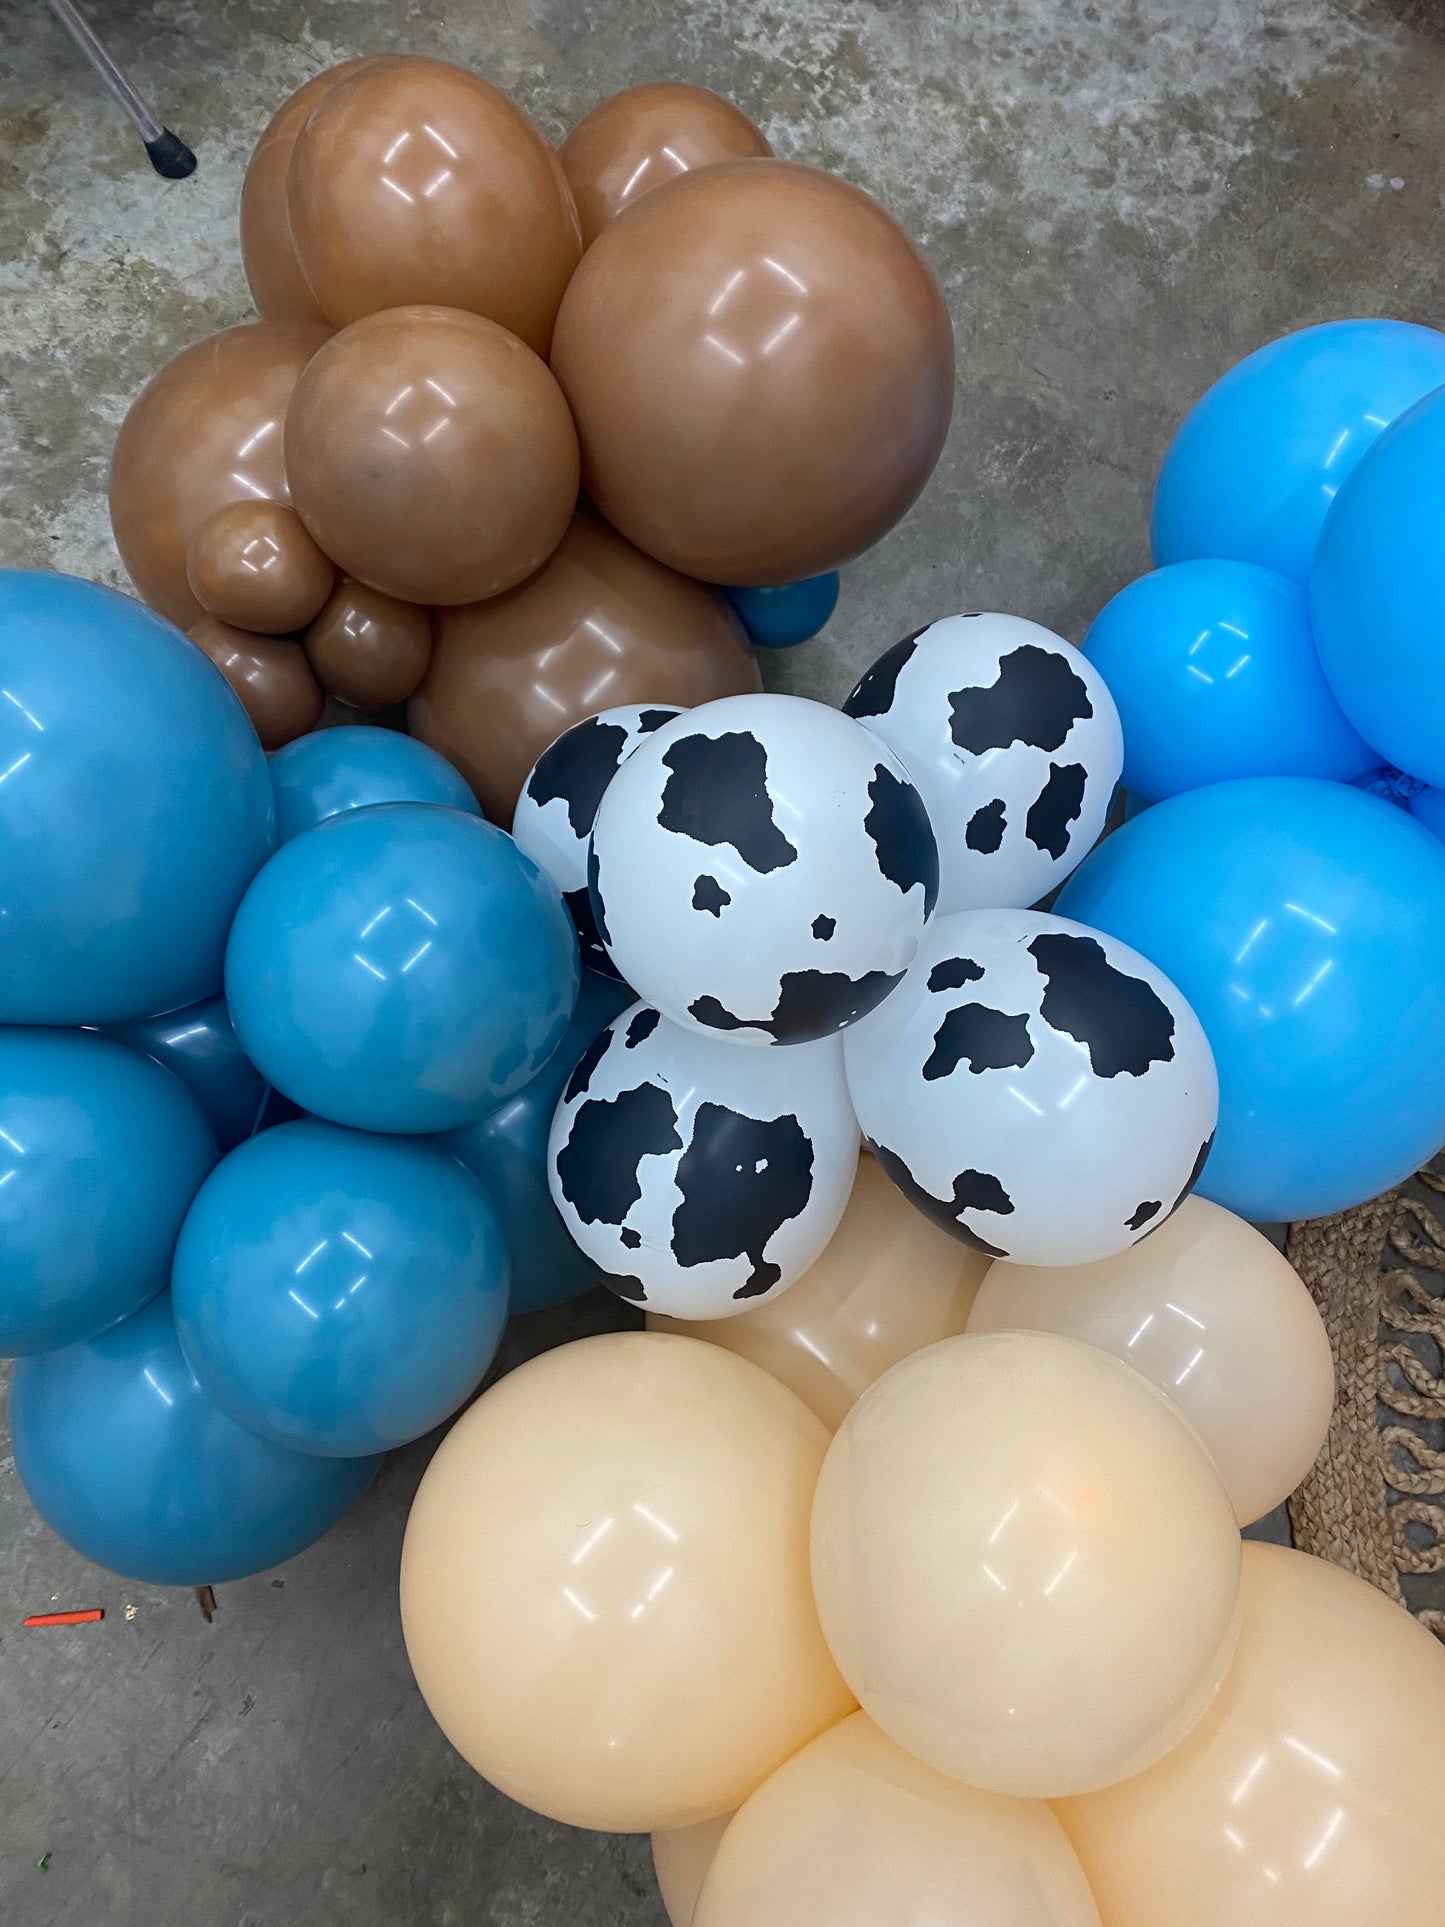 Yeehaw DIY Balloon Arch Garland Kit | Muted Blue Brown Cow Print Beige | First Rodeo Cowboy Kids Adults Birthday Party Organic Balloon Decor